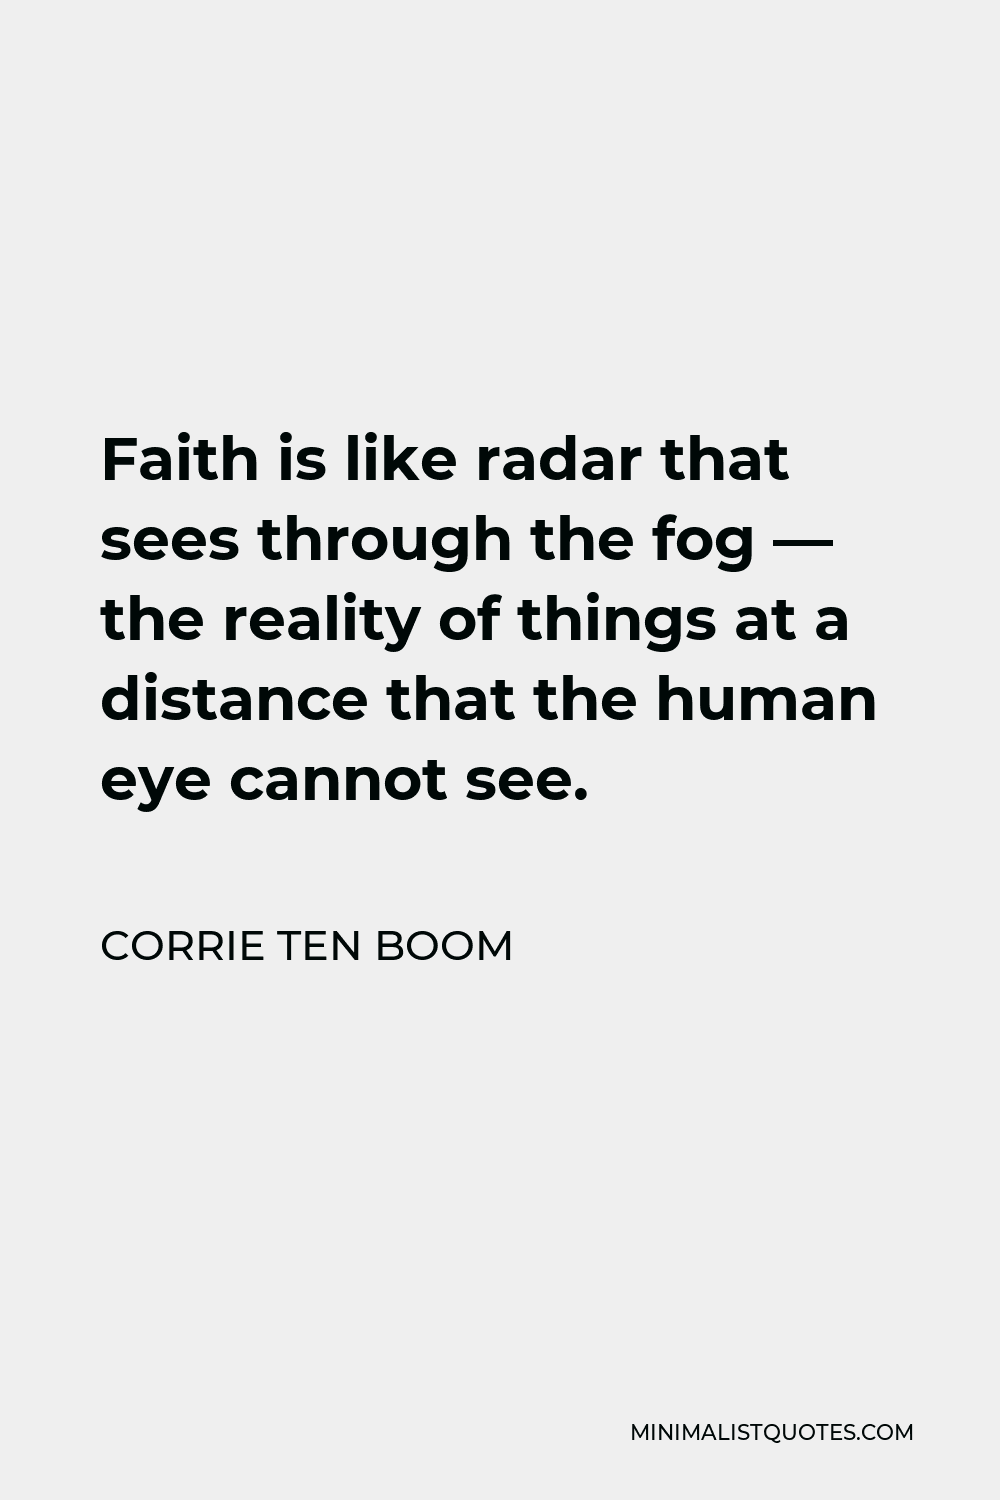 Corrie ten Boom Quote - Faith is like radar that sees through the fog — the reality of things at a distance that the human eye cannot see.